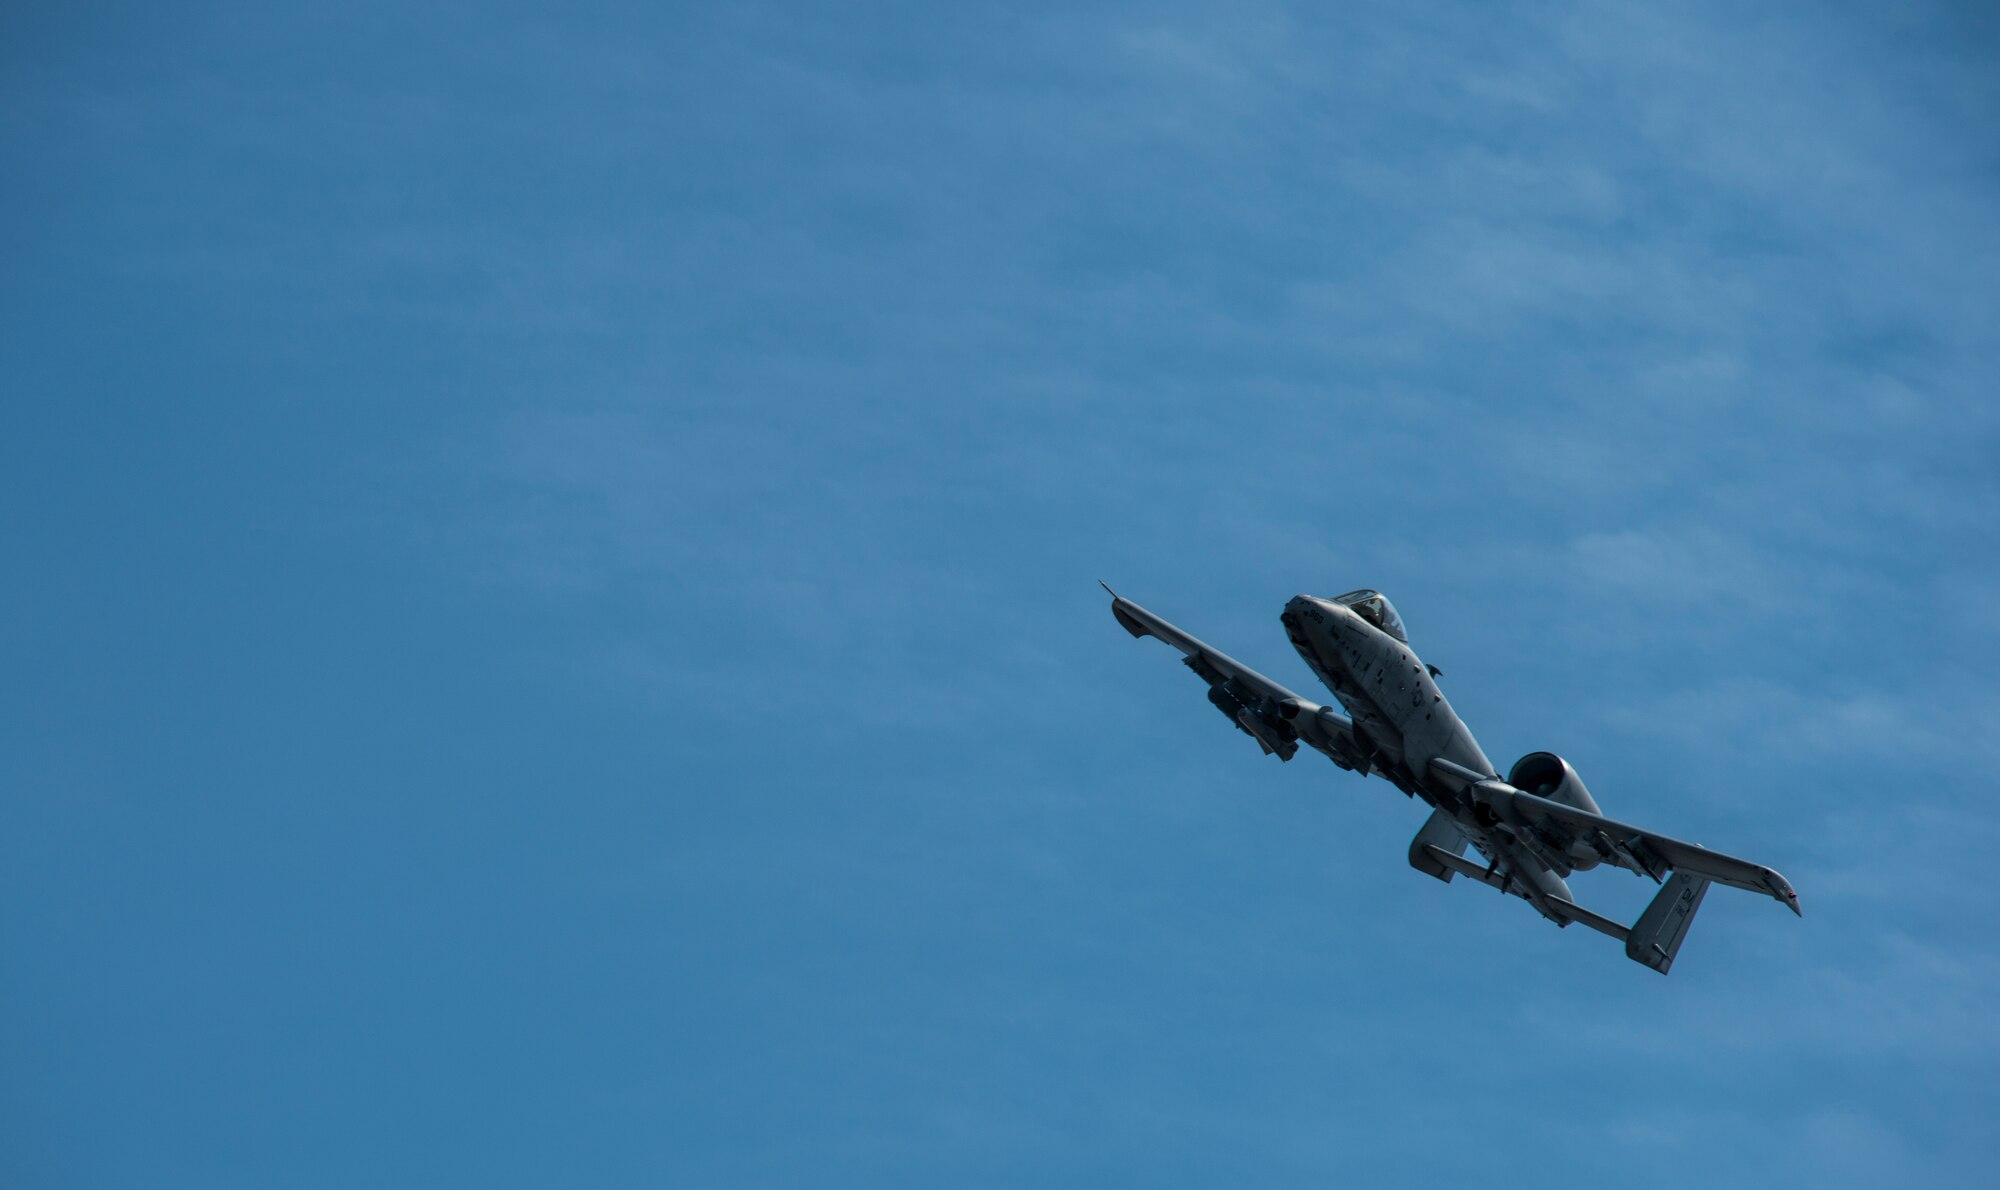 A U.S. Air Force A-10 Thunderbolt II attack aircraft assigned to the 354th Expeditionary Fighter Squadron flies during a theater security package deployment to Namest Air Base, Czech Republic, April 14, 2015. This TSP represents America’s forward presence, postured alongside European allies and partners ensuring security, protecting global interests, and bolstering economic bonds. (U.S. Air Force photo by Staff Sgt. Christopher Ruano/Released/Released)